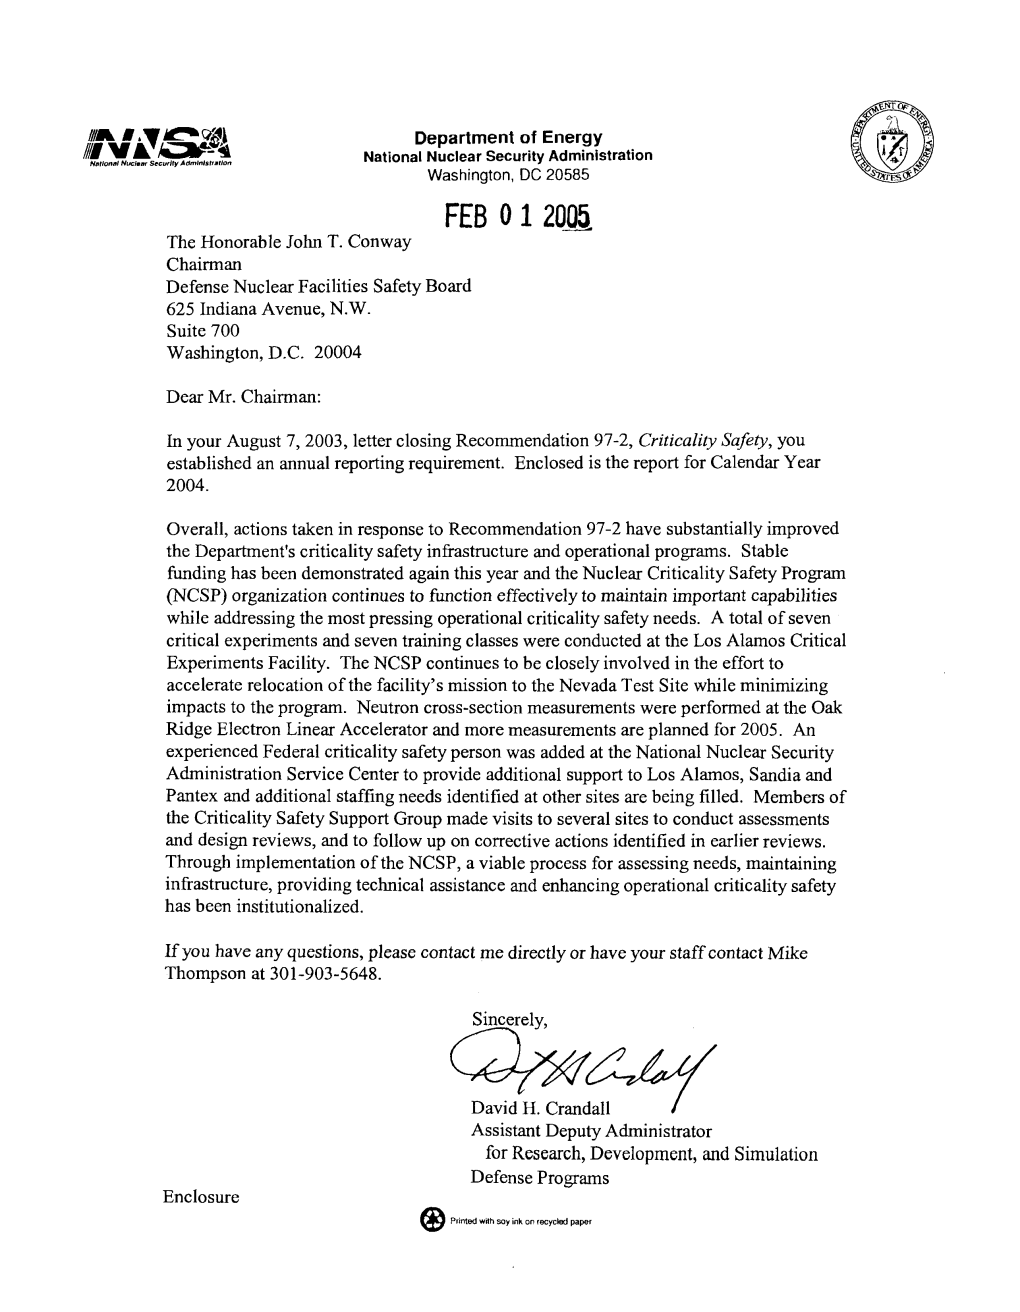 February 1, 2005, Department Letter Forwarding Report on Criticality